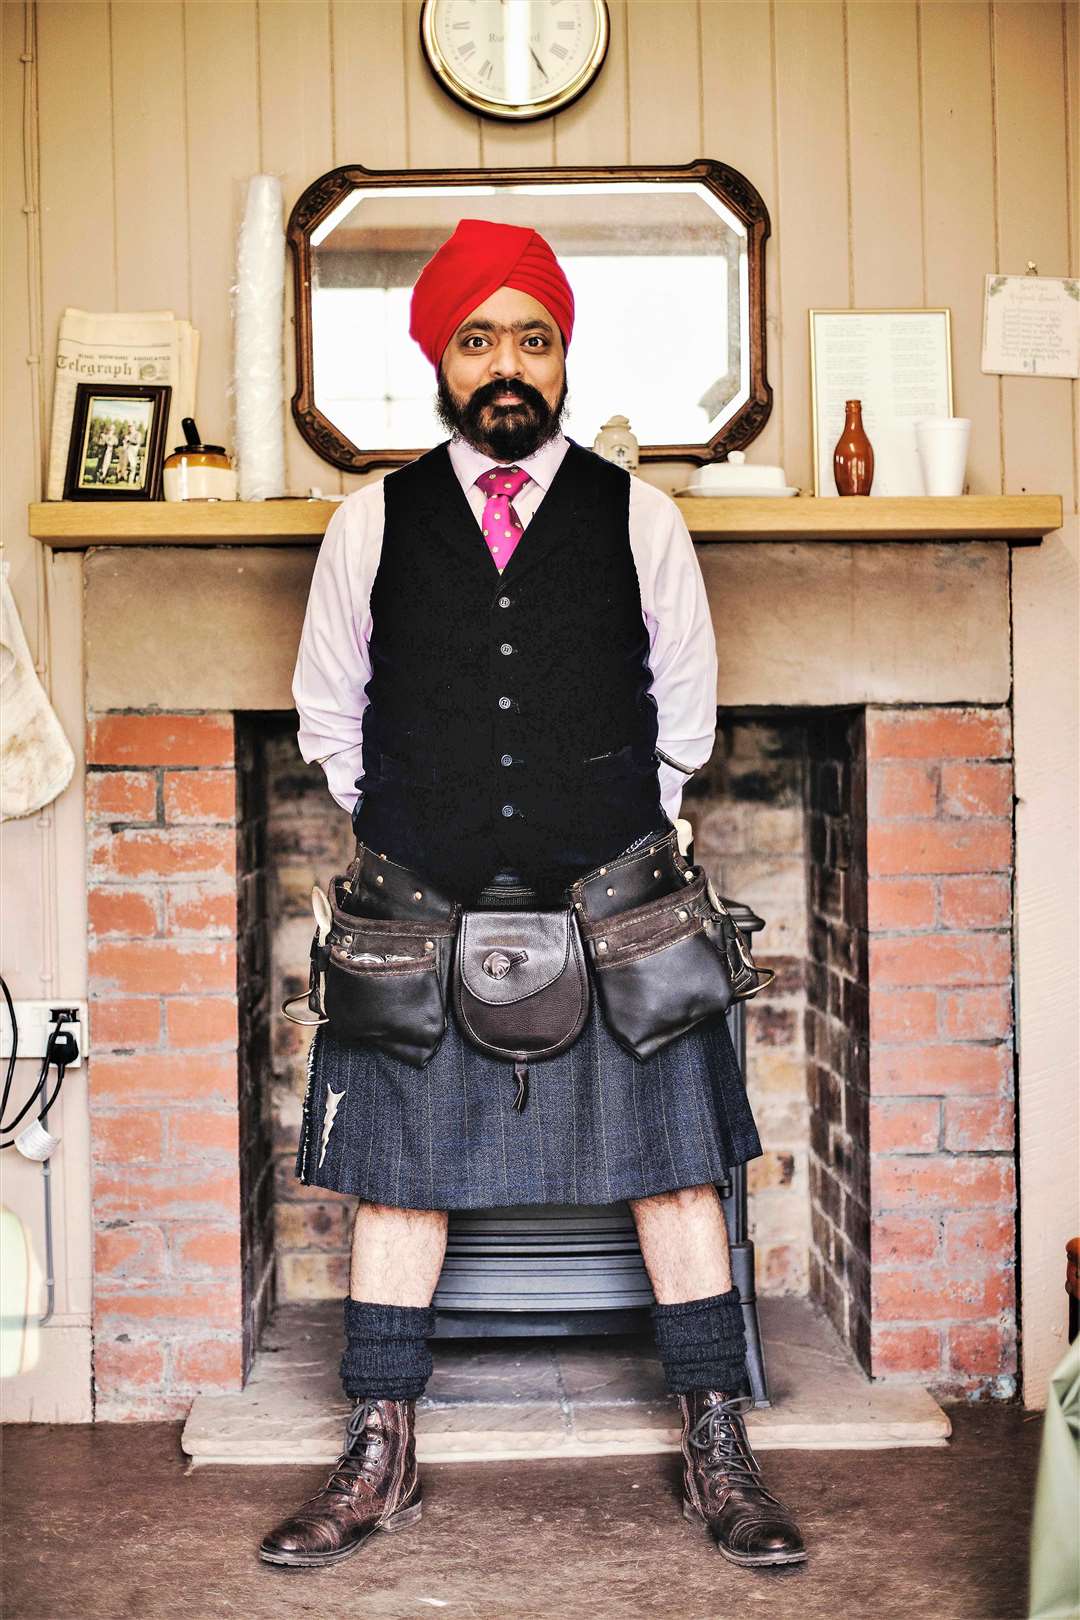 Celebrity chef Tony Singh has sent a message of support to Taste North. Picture: Haarala Hamilton